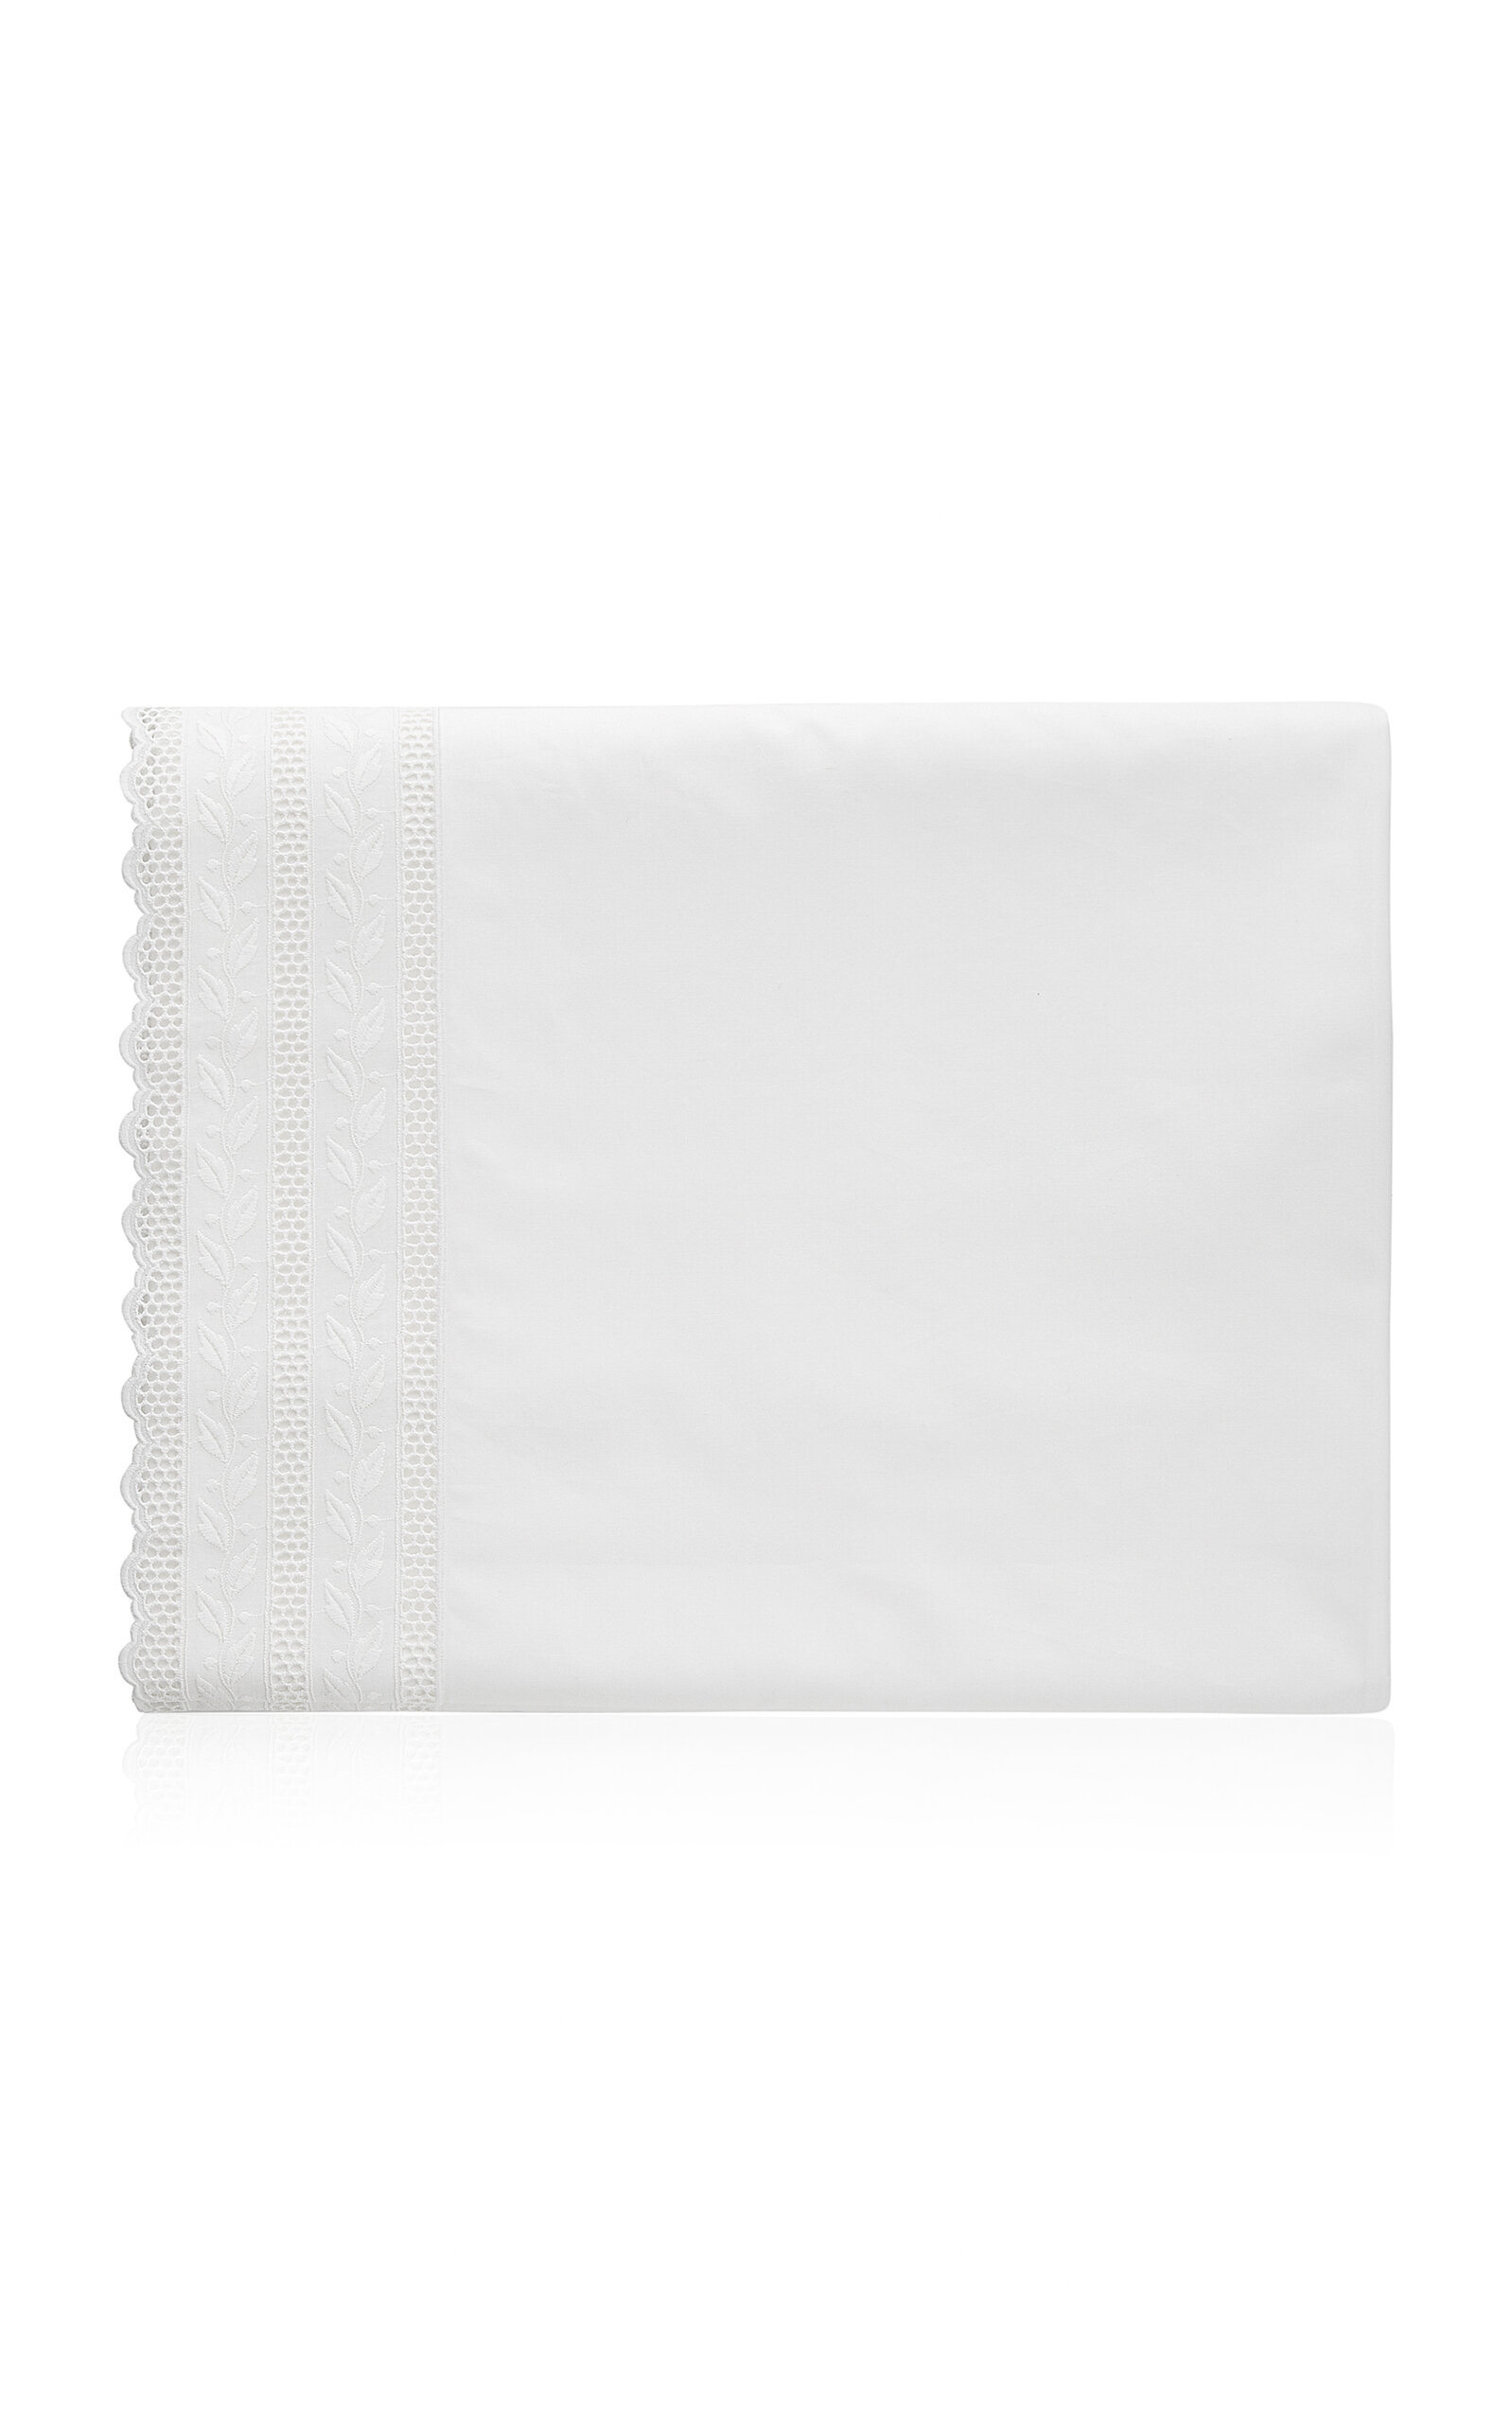 Los Encajeros Hojas Percale Percale King Top Sheet In White